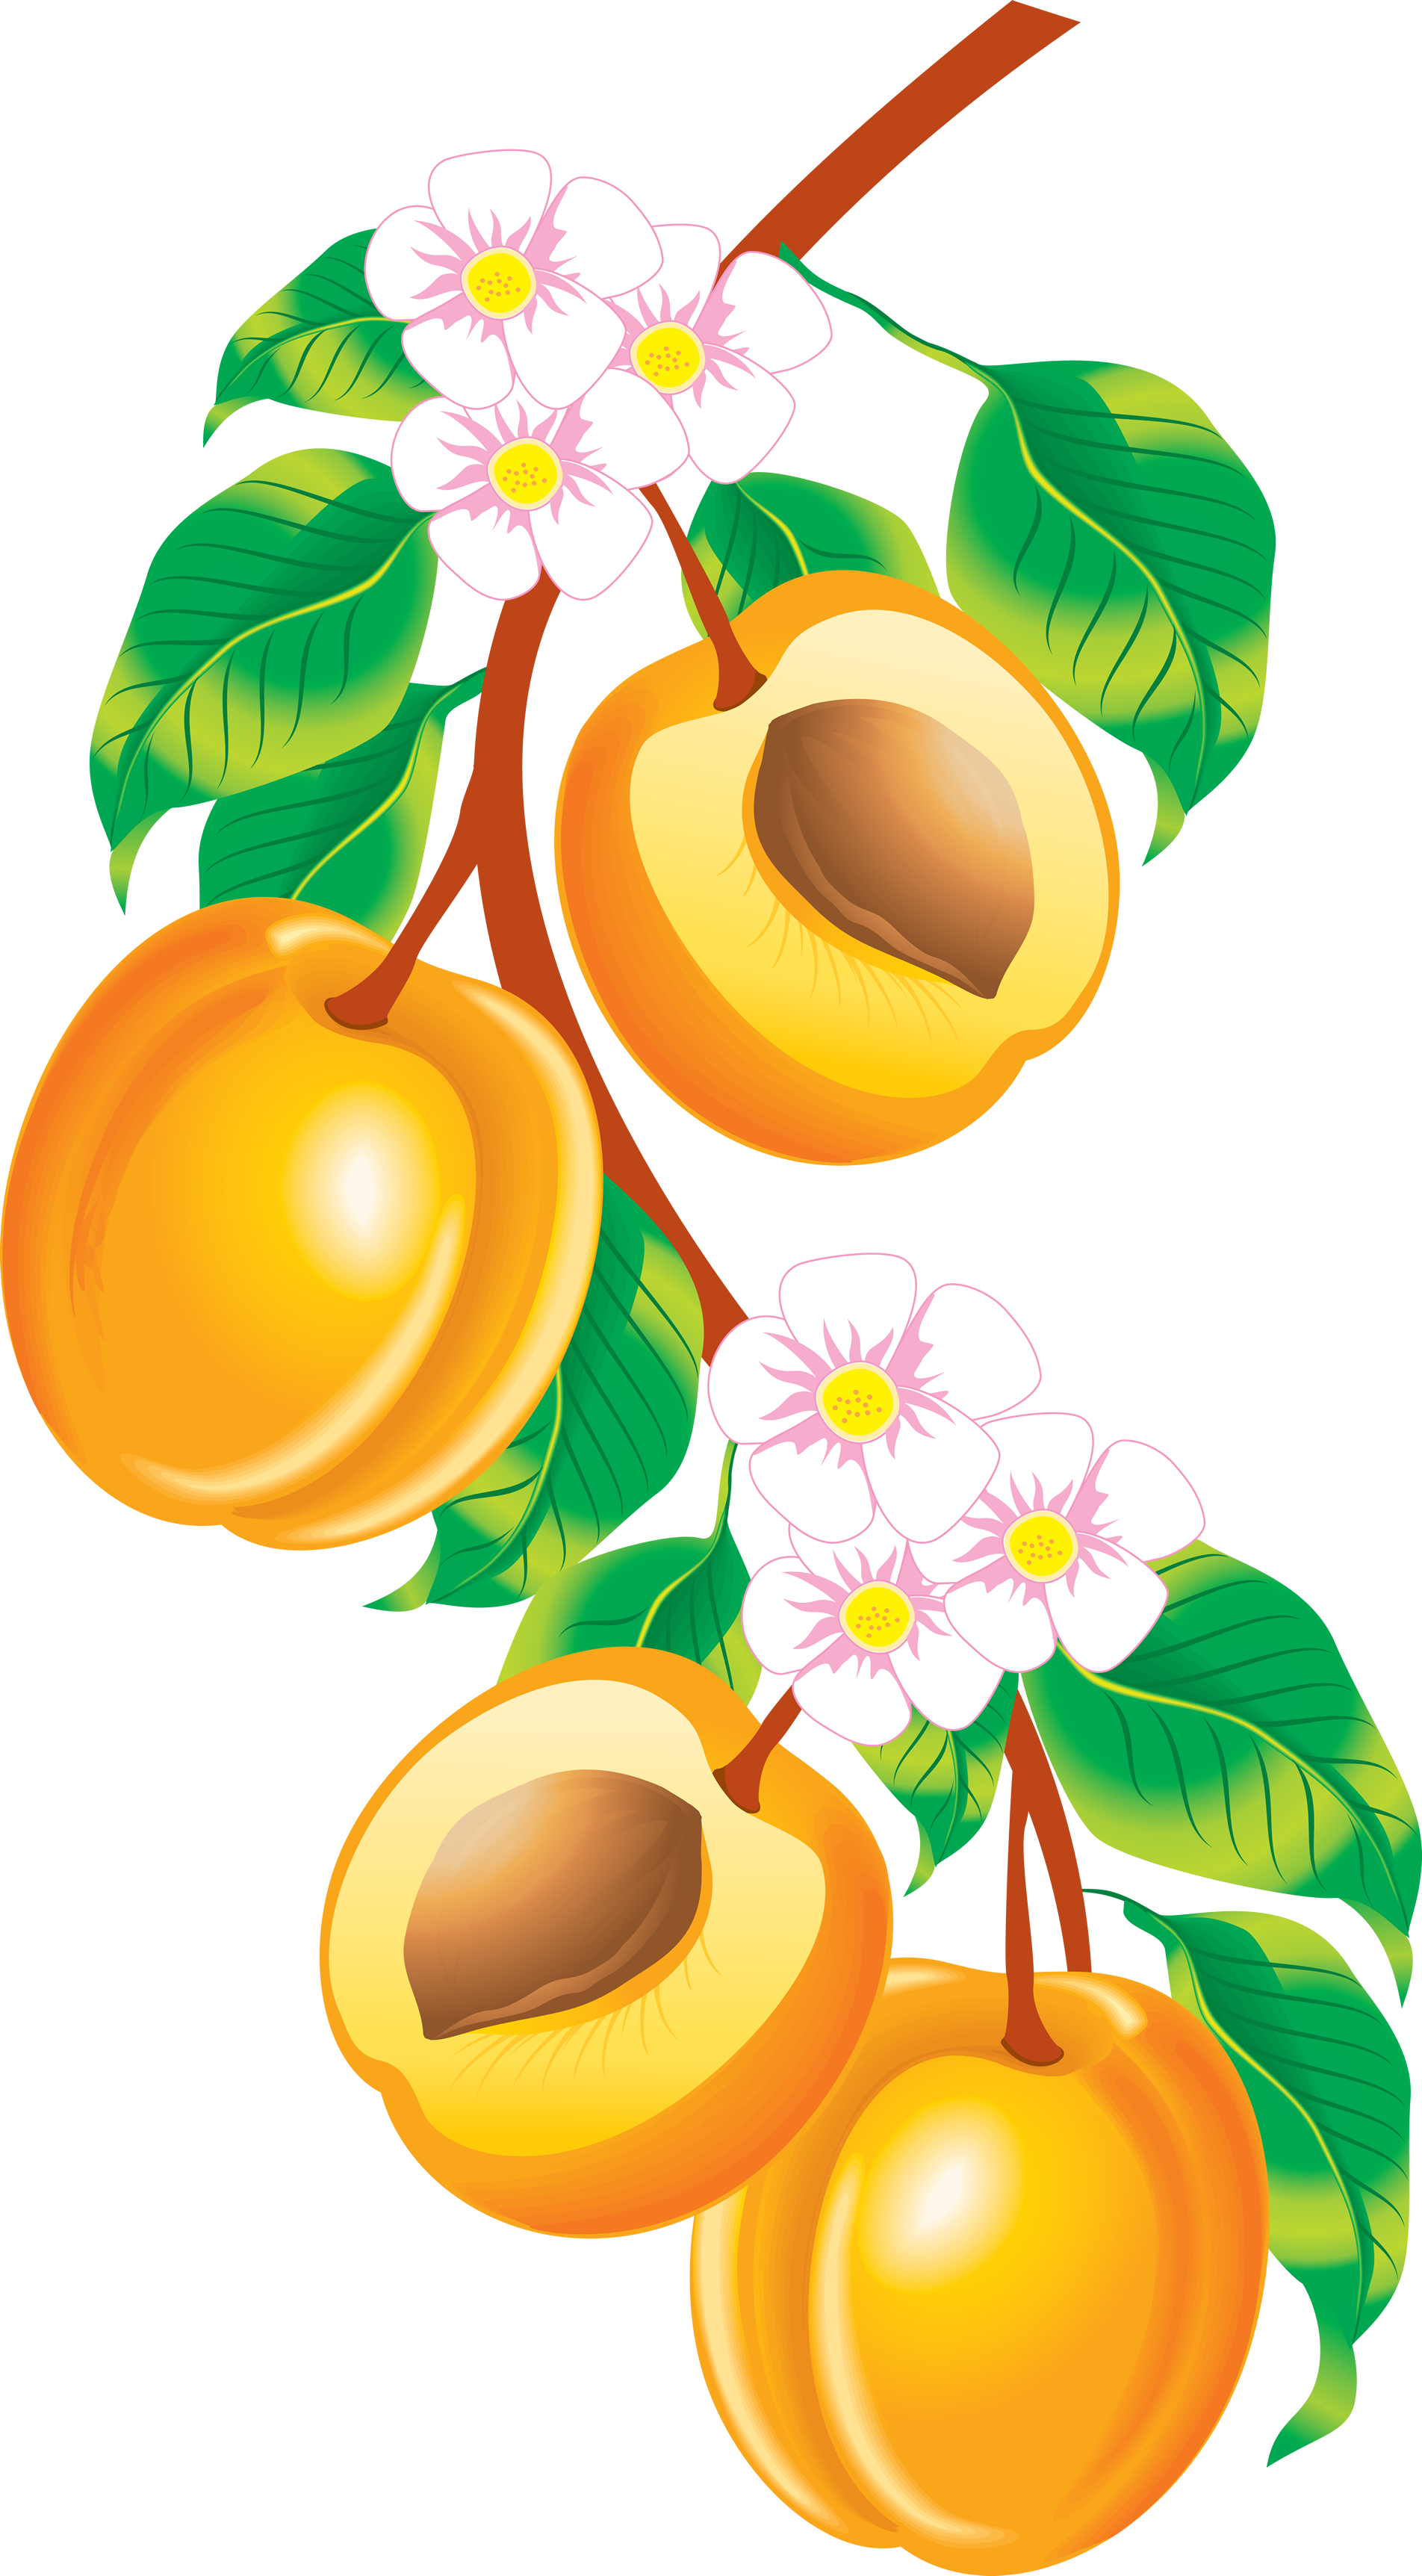 Download Peaches clipart vector, Peaches vector Transparent FREE ...